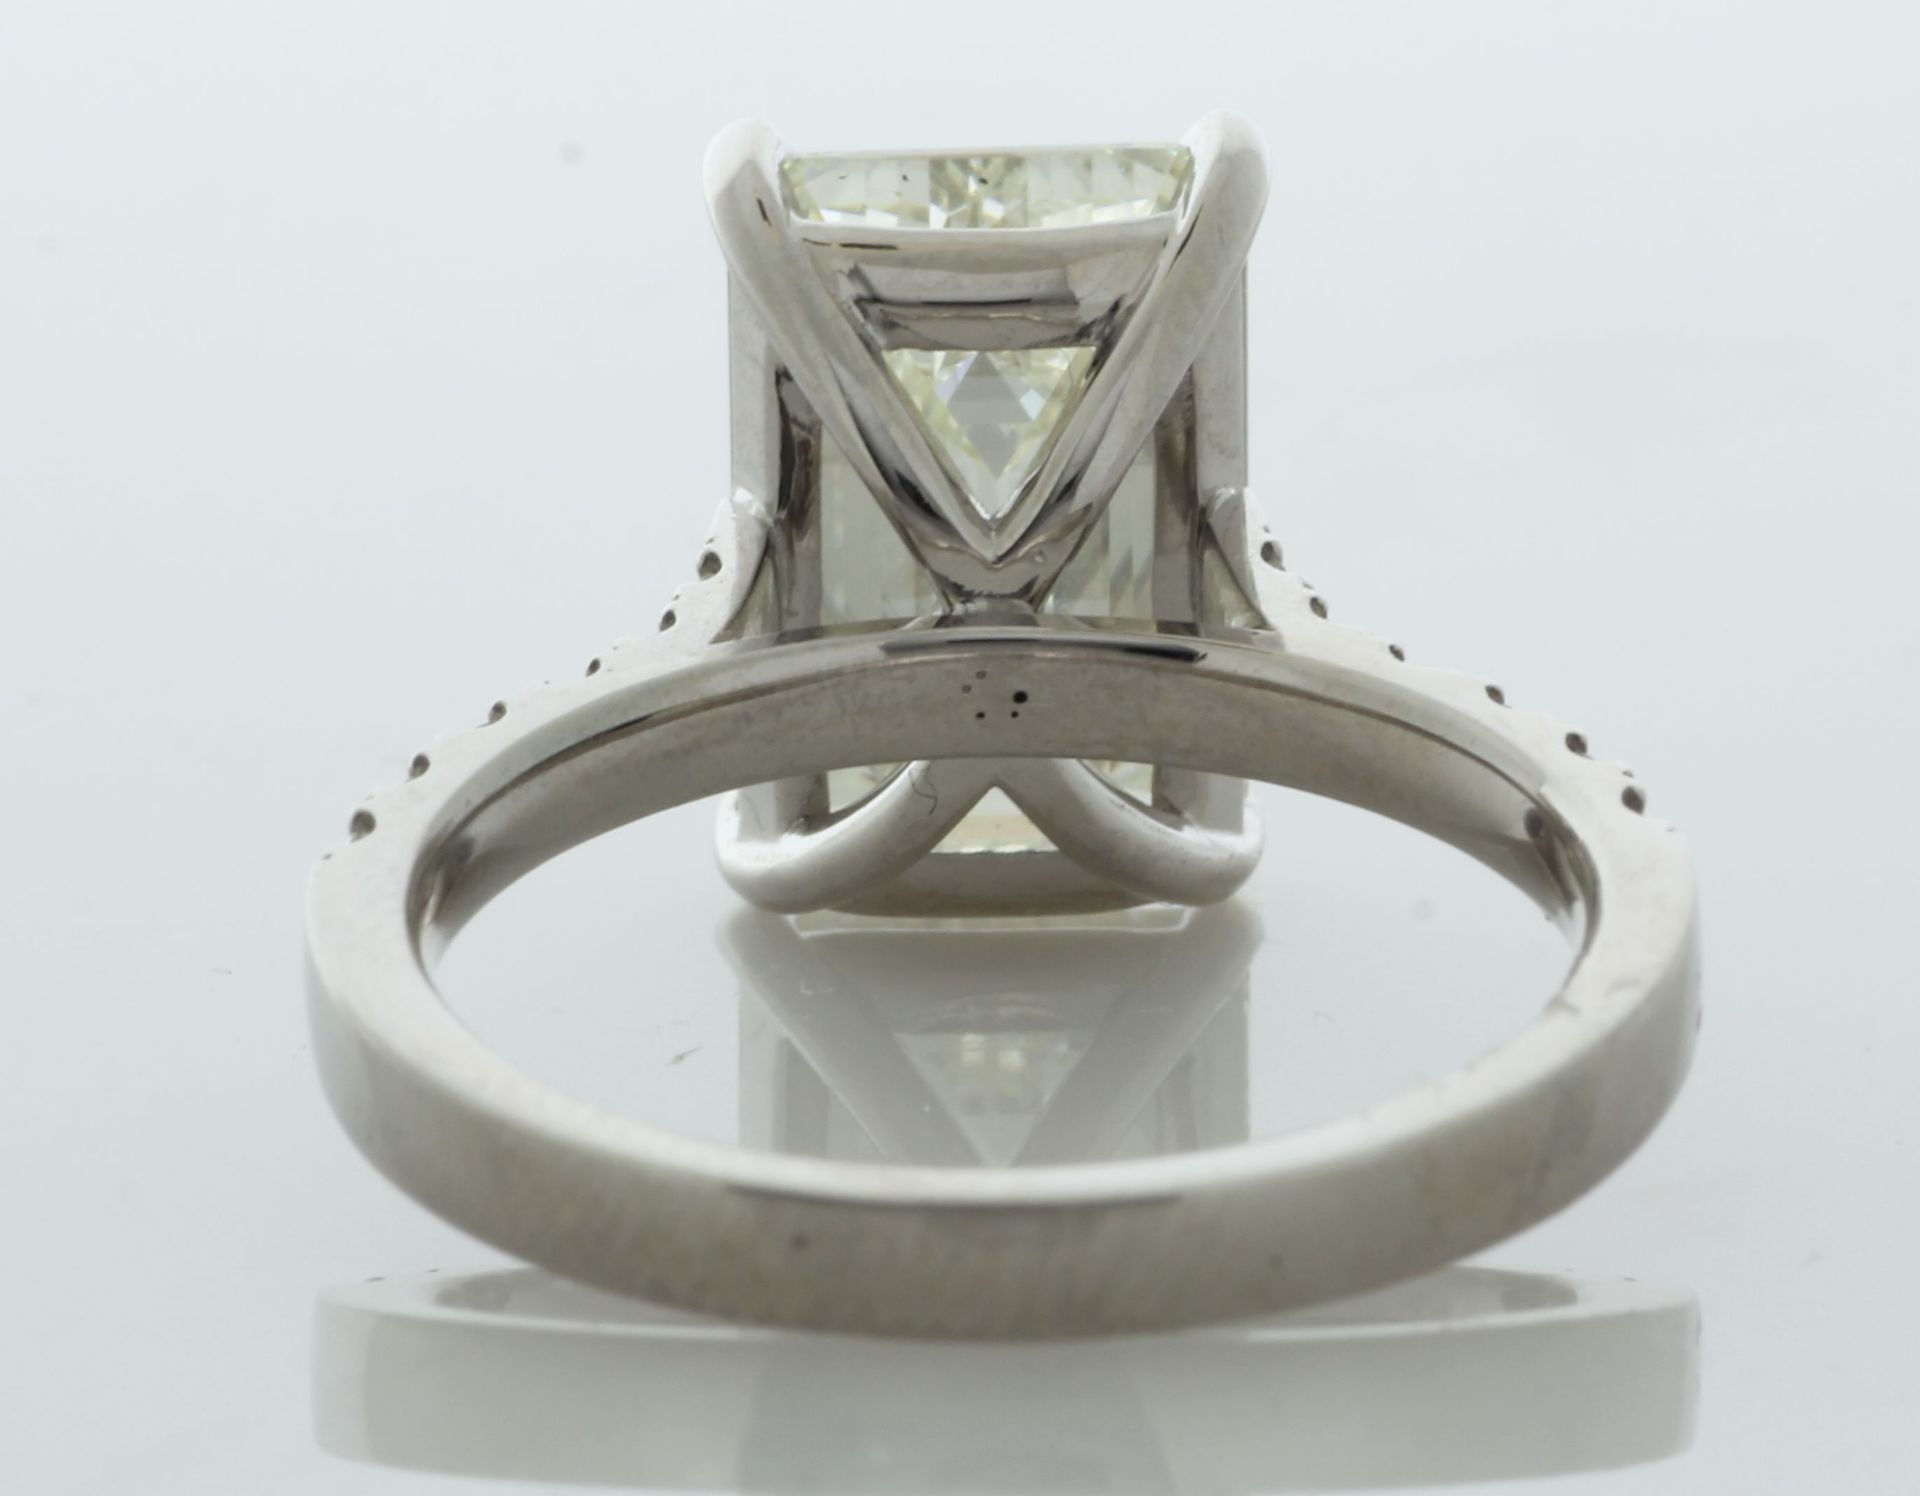 18ct White Gold Single Stone Emerald Cut Diamond Ring (D5.00) 5.35 Carats - Valued By GIE £437,115. - Image 3 of 3